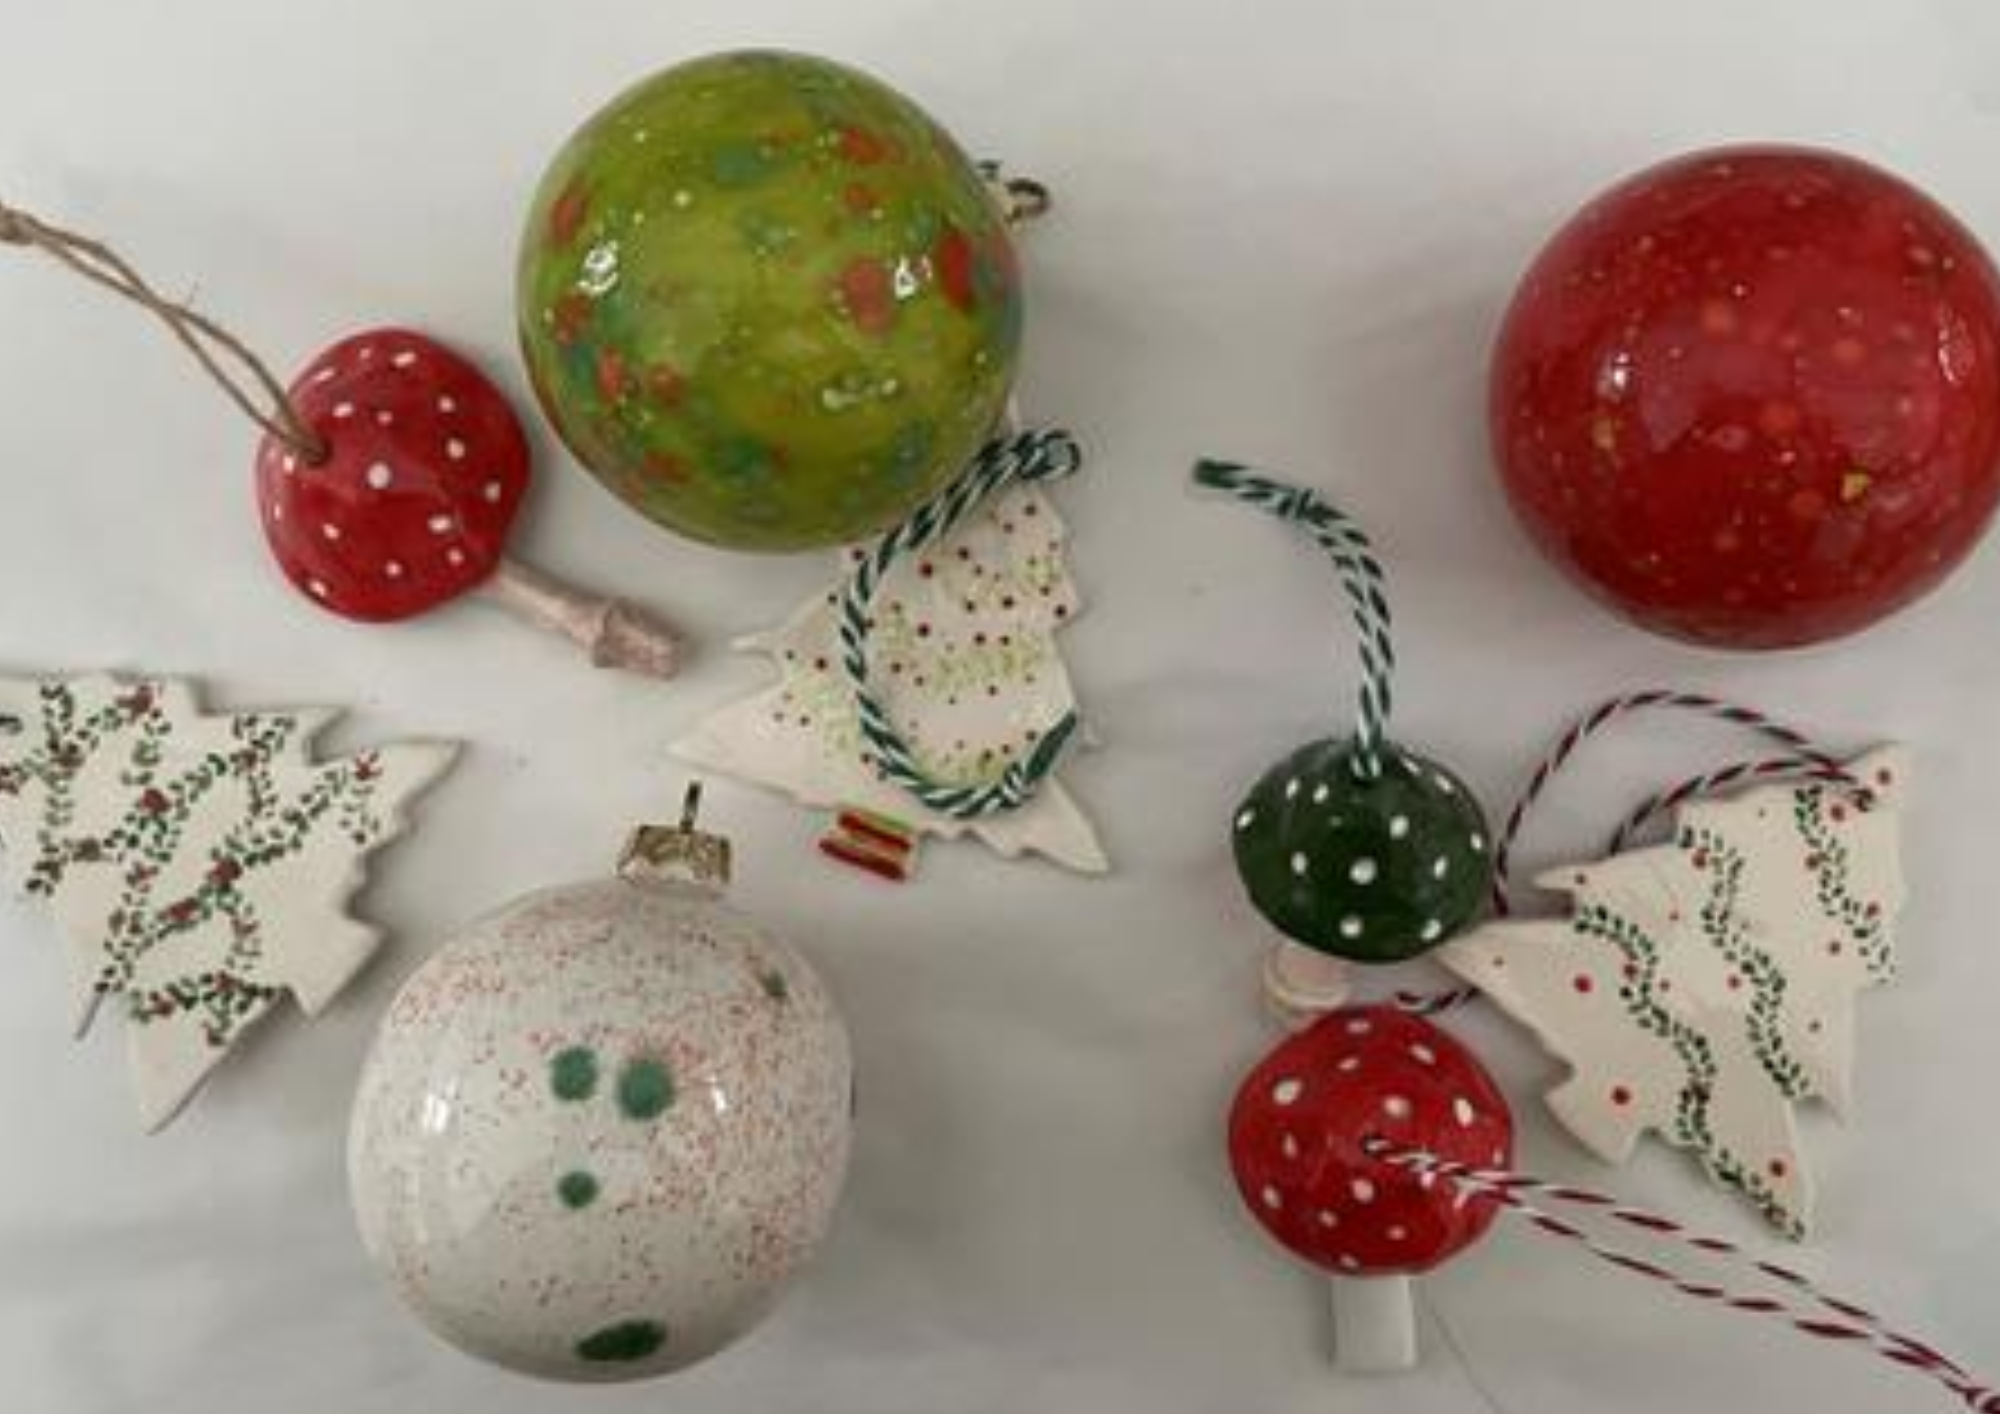 Red, green and white Christmas decorations & baubles